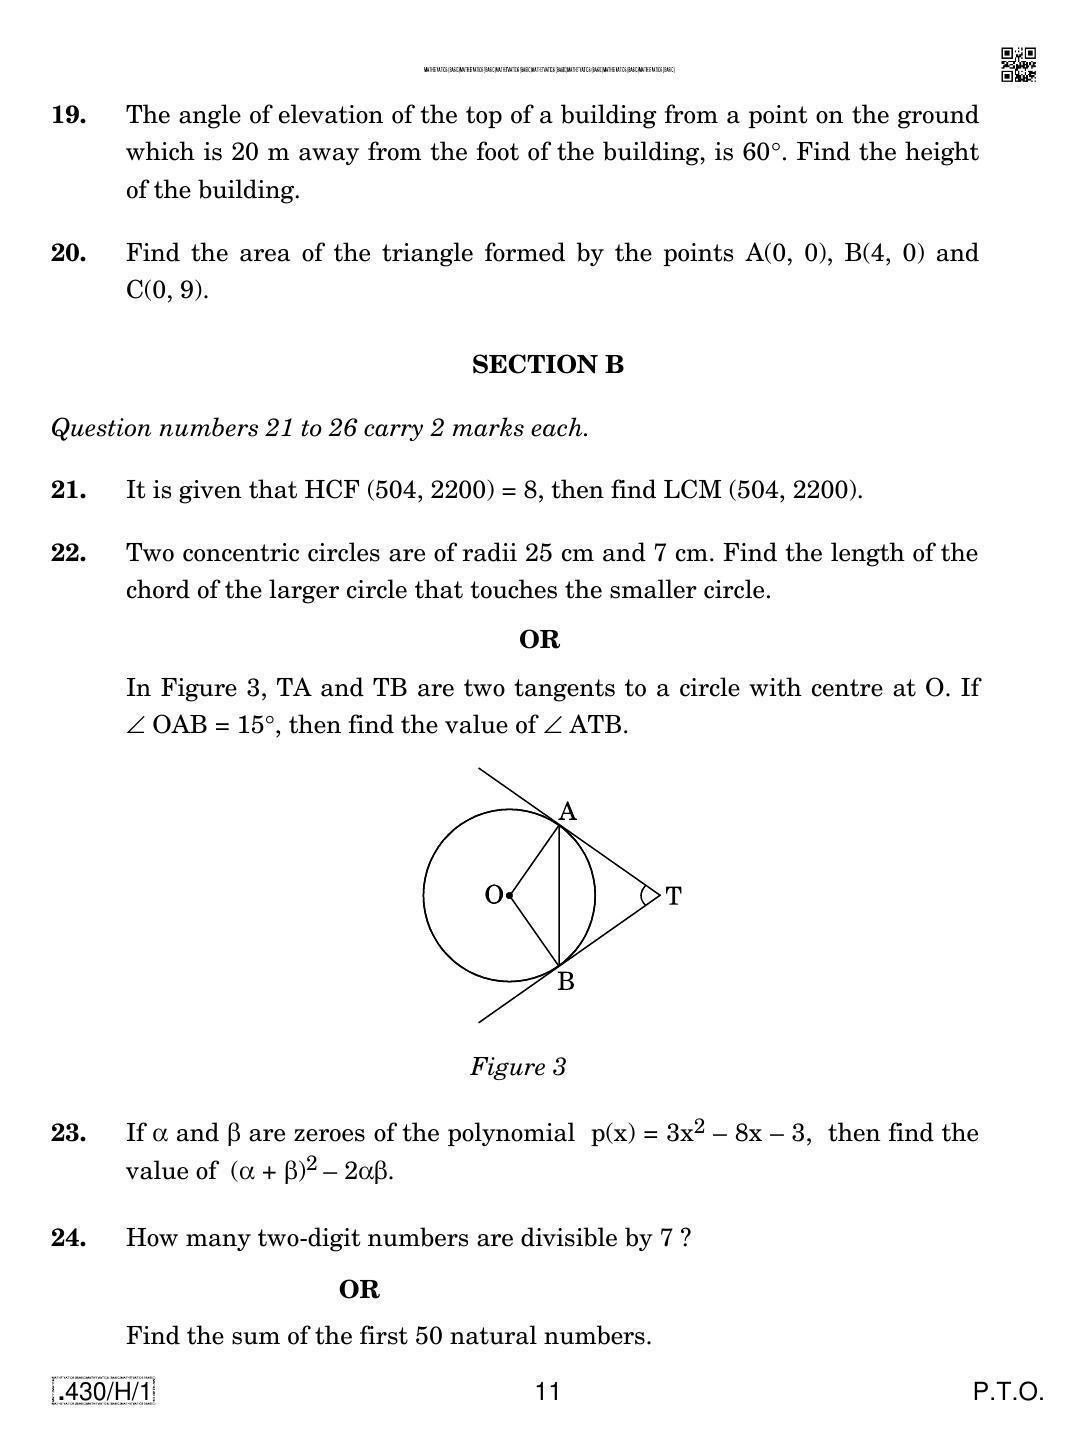 CBSE Class 10 430-C-1 - Maths (Basic) 2020 Compartment Question Paper - Page 11